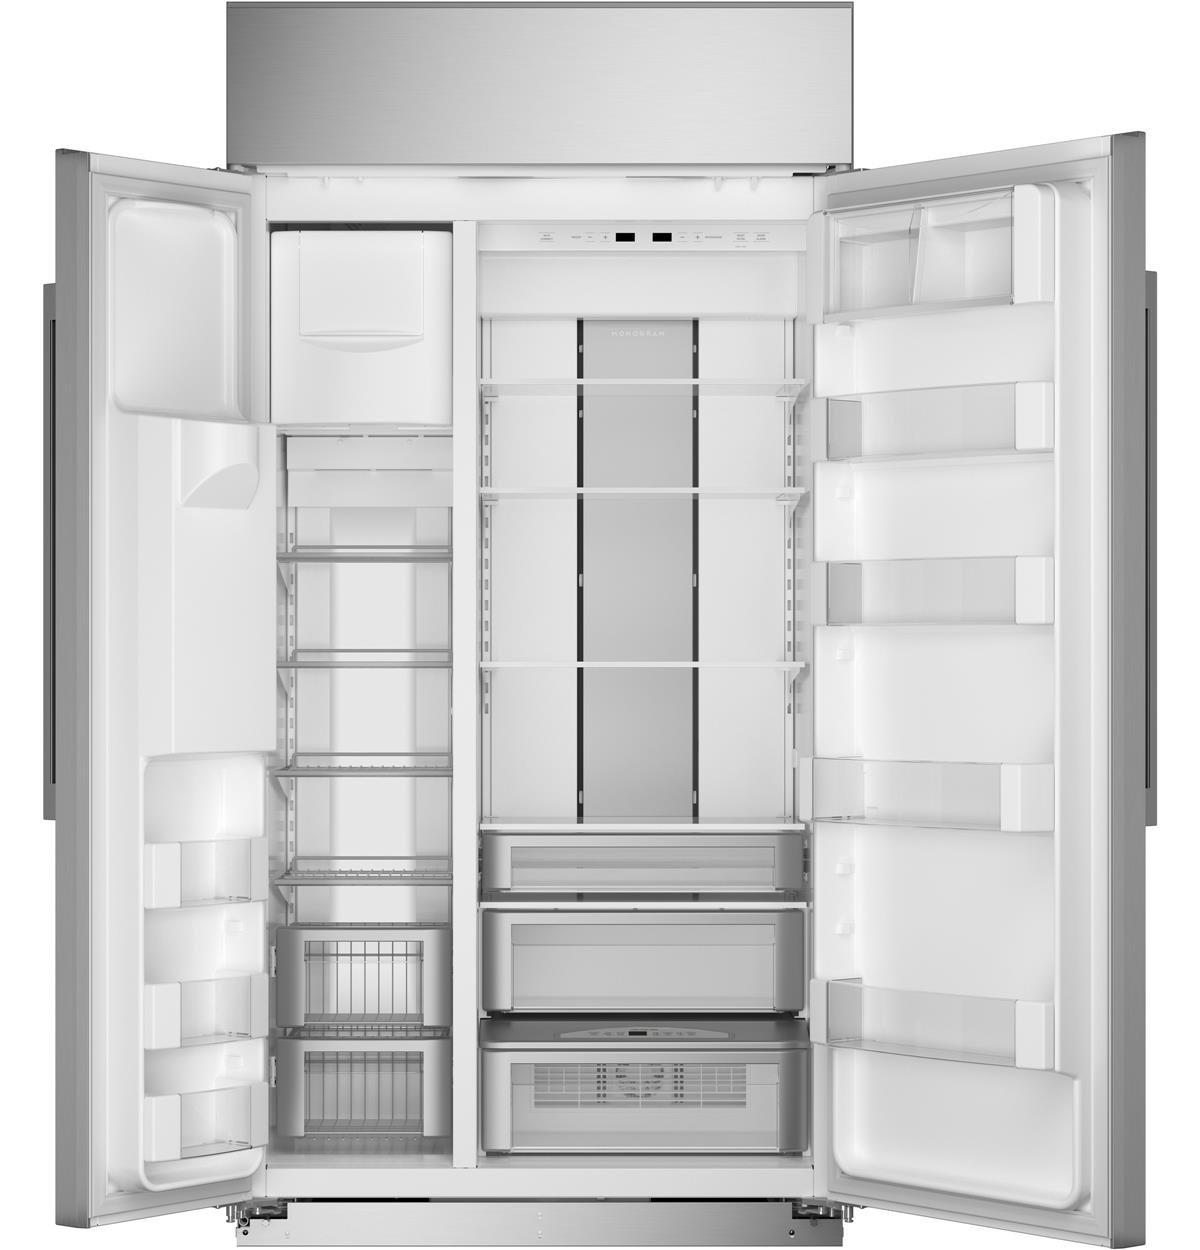 Advanced Temperature Management System With Multi-shelf Air Tower